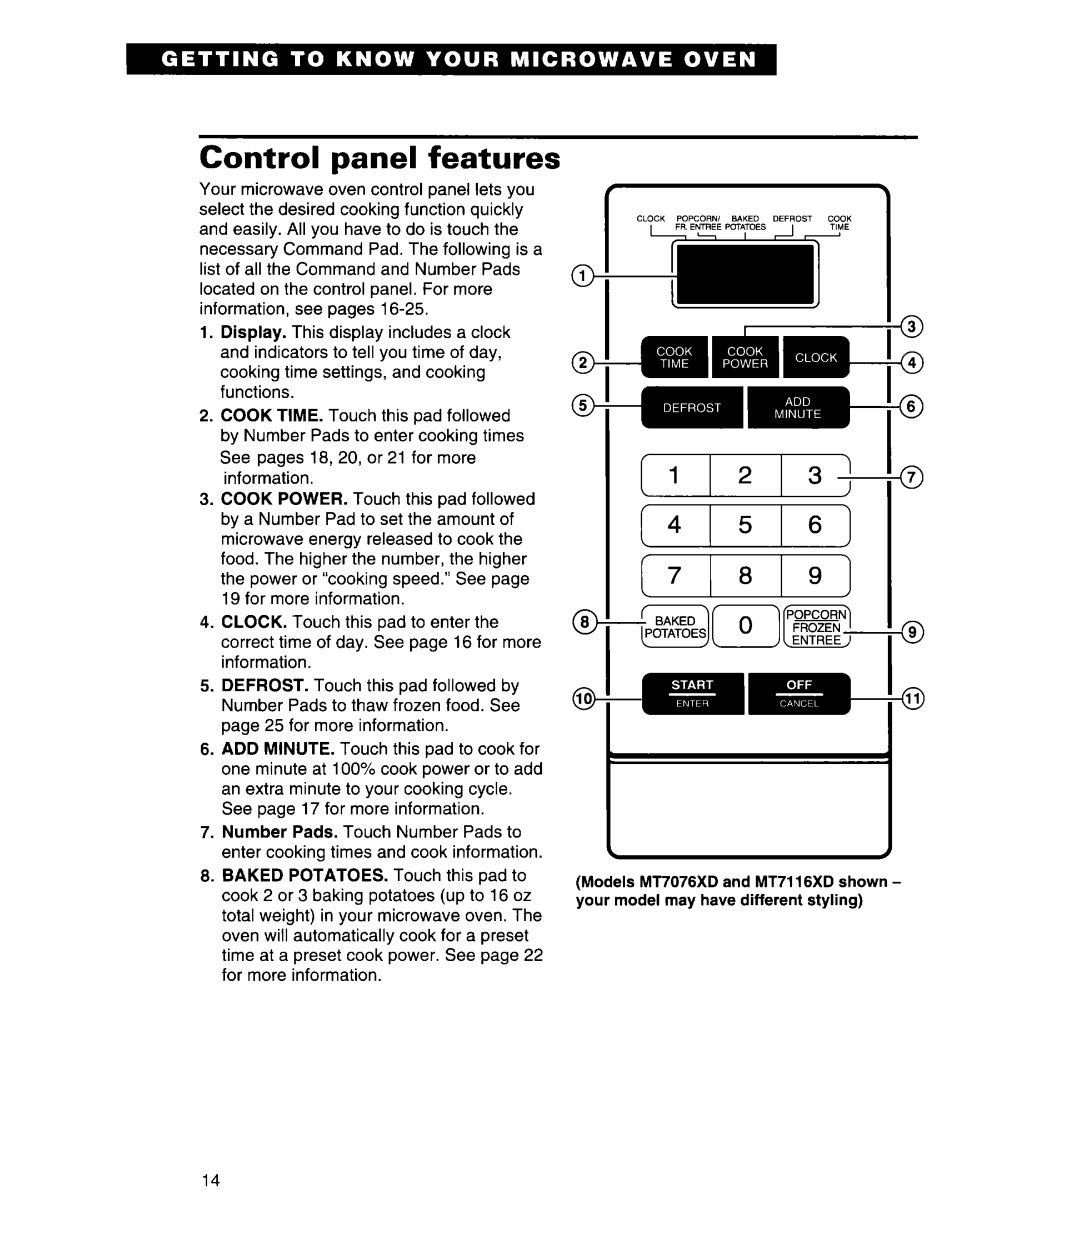 Whirlpool MT7116XD, MT7078XD, MT7118XD installation instructions @ o- o, 08 @, Control panel features, I11213-1, 1415161 